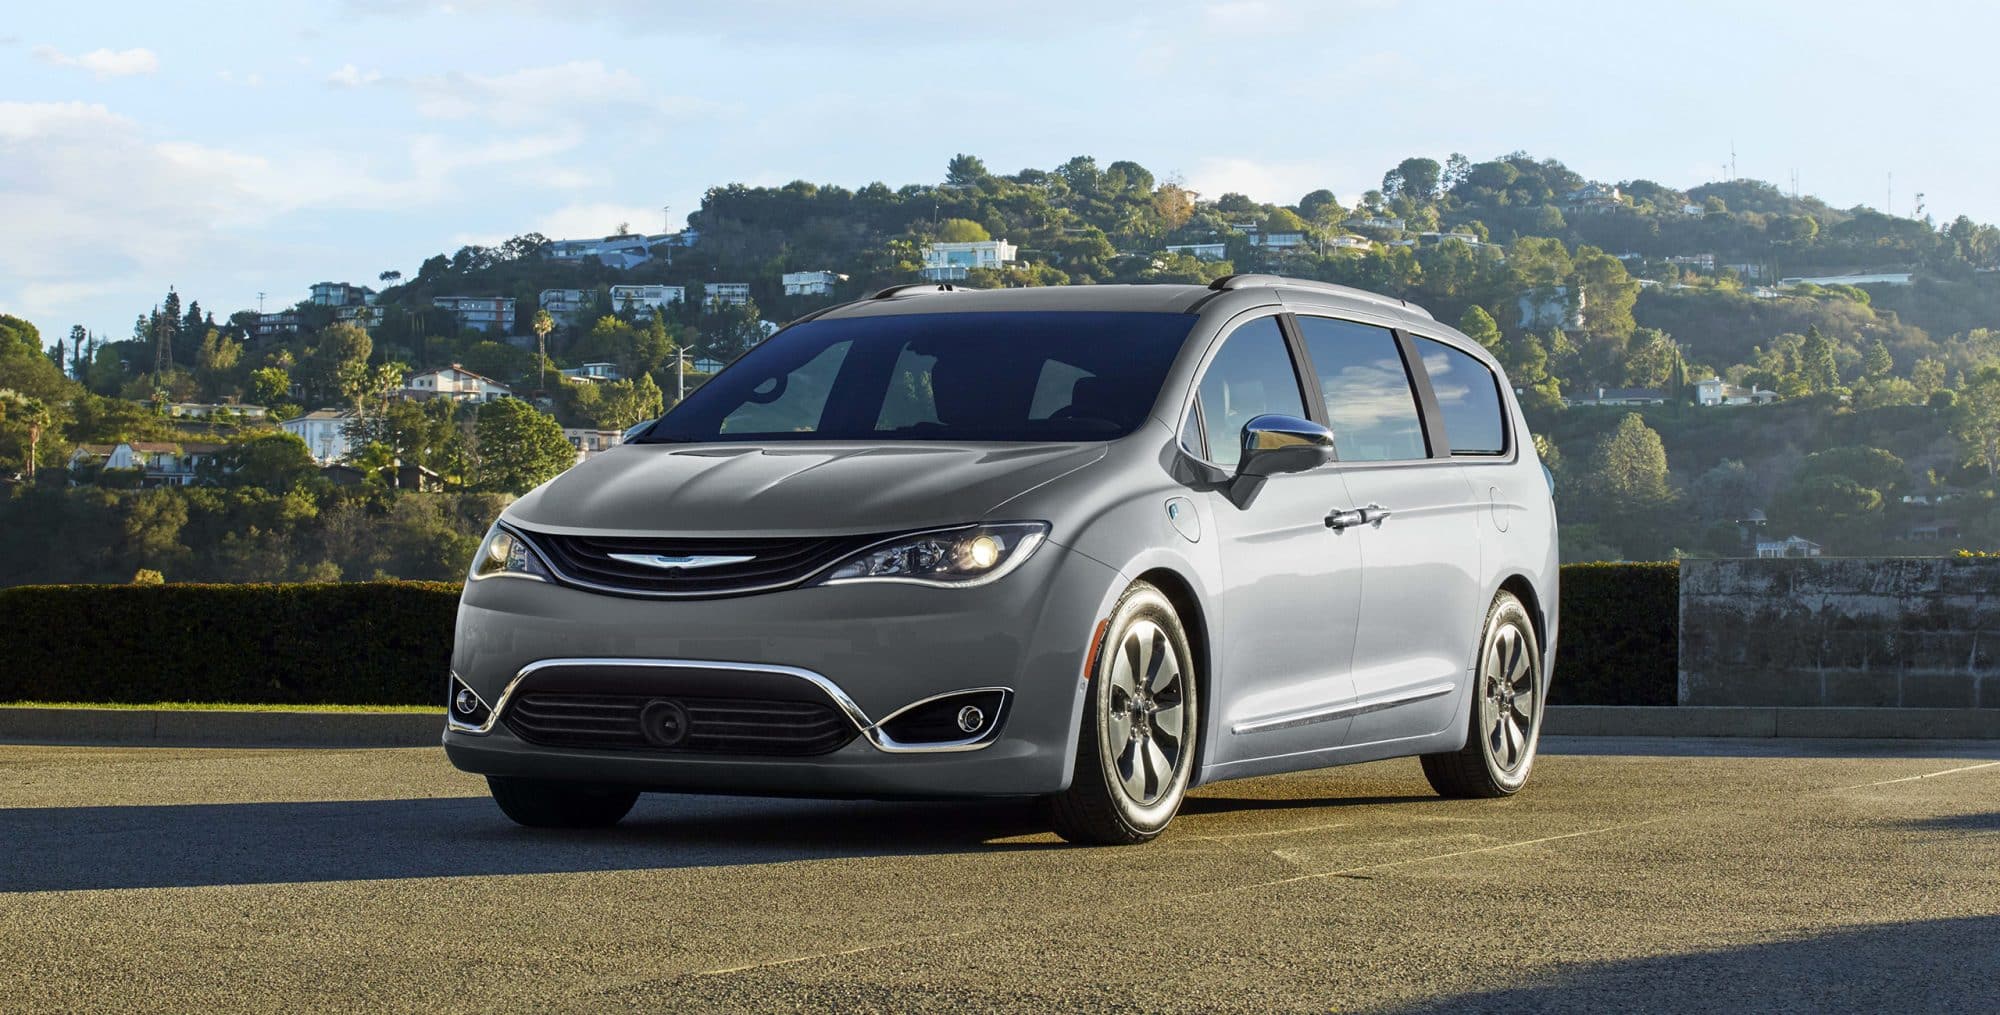 Gray 2018 Chrysler Pacifica with mountain homes in background